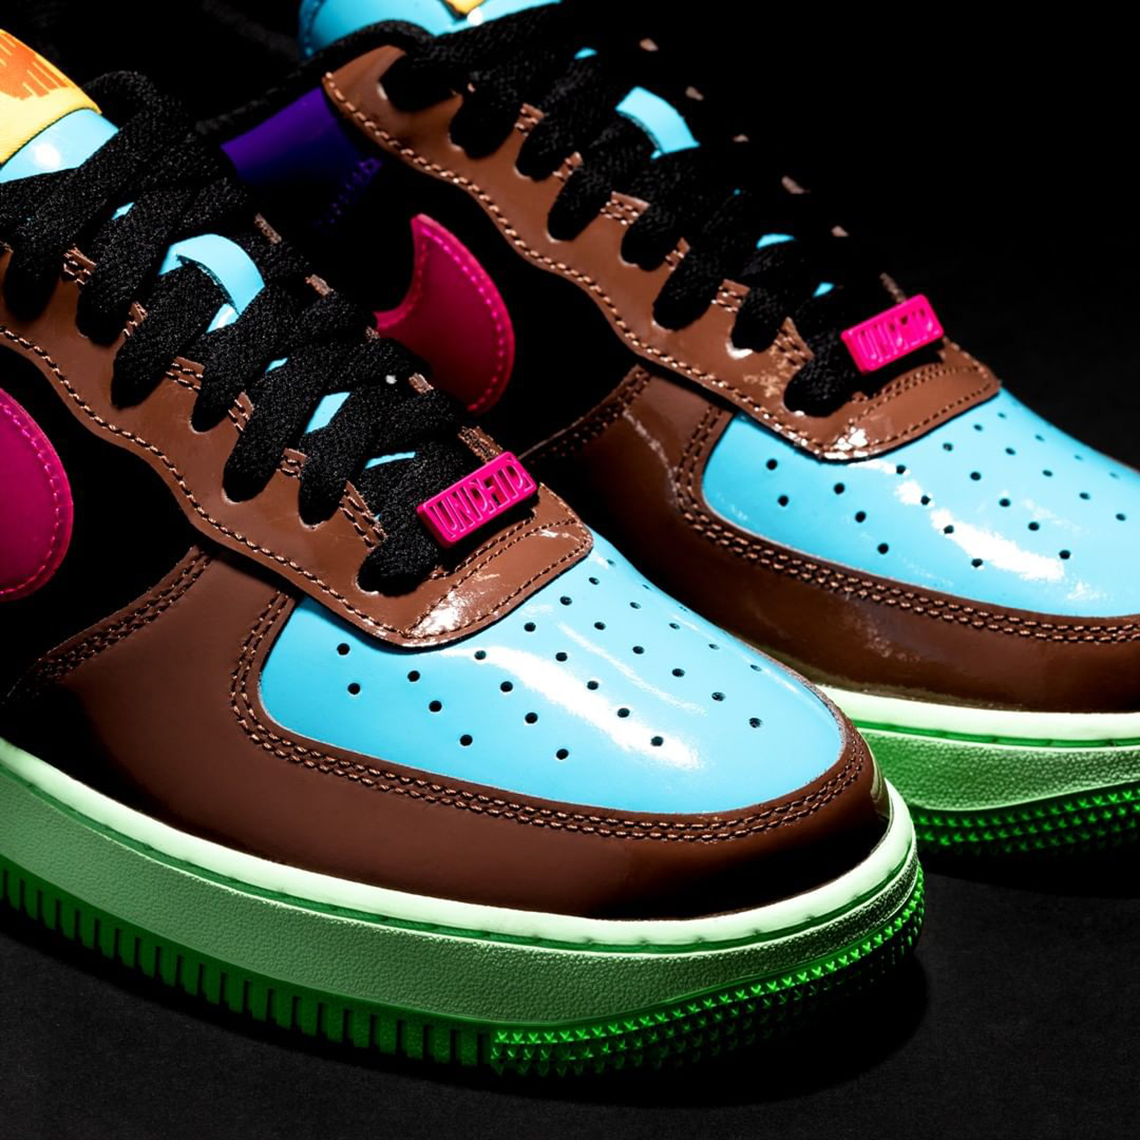 UNDEFEATED Nike Air Force 1 Low SP Pink Prime Release Date 